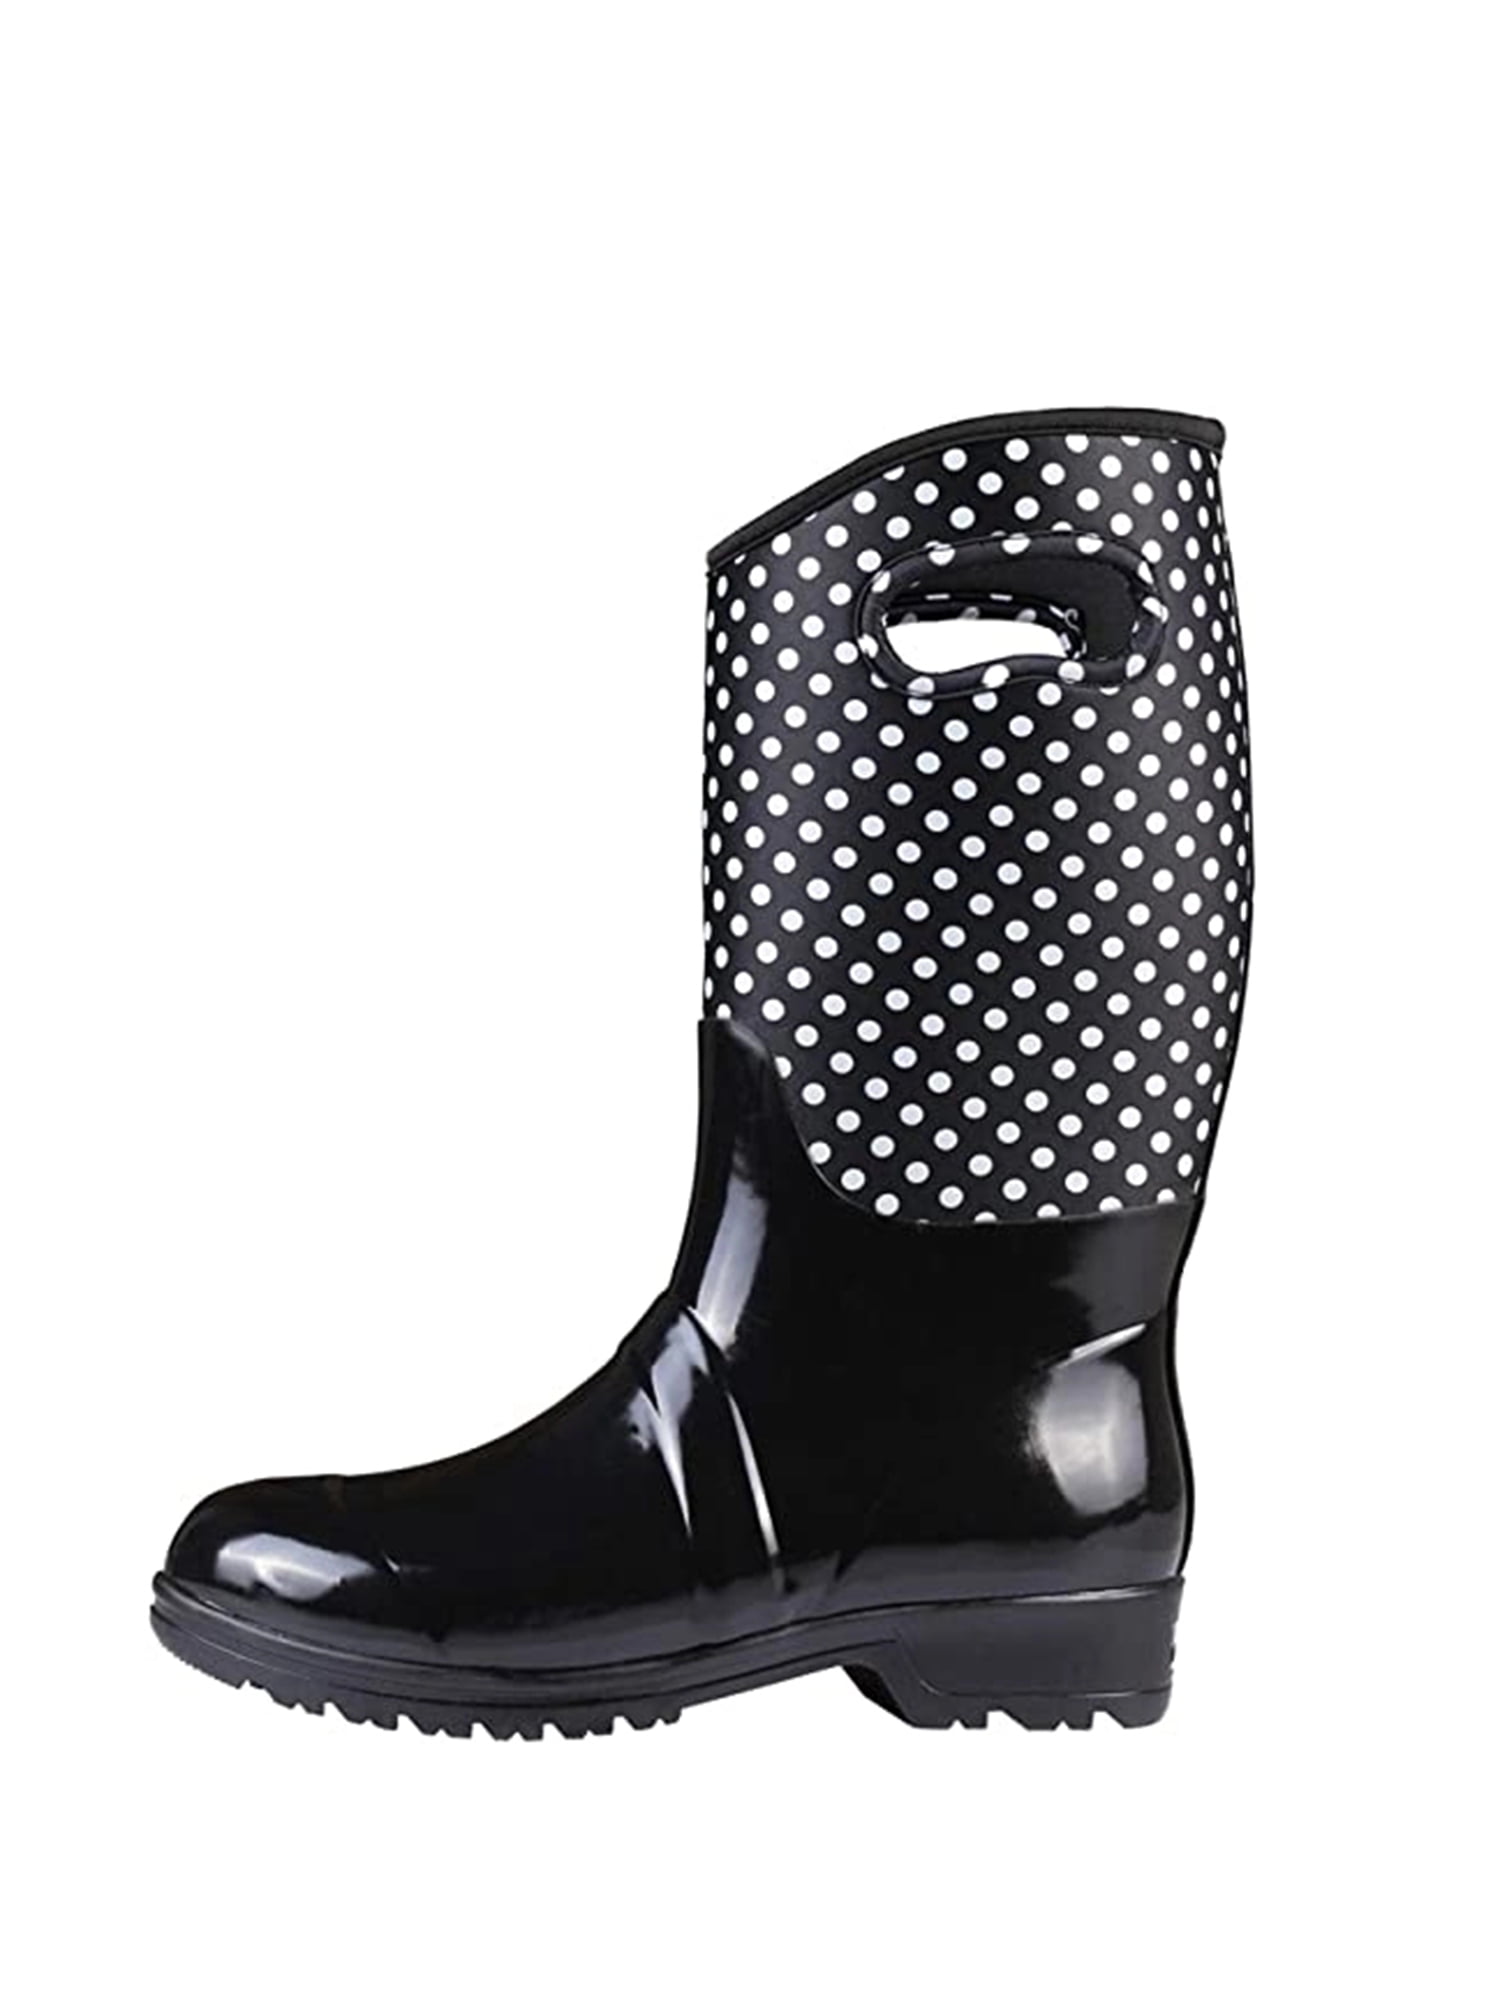 slip on water boots